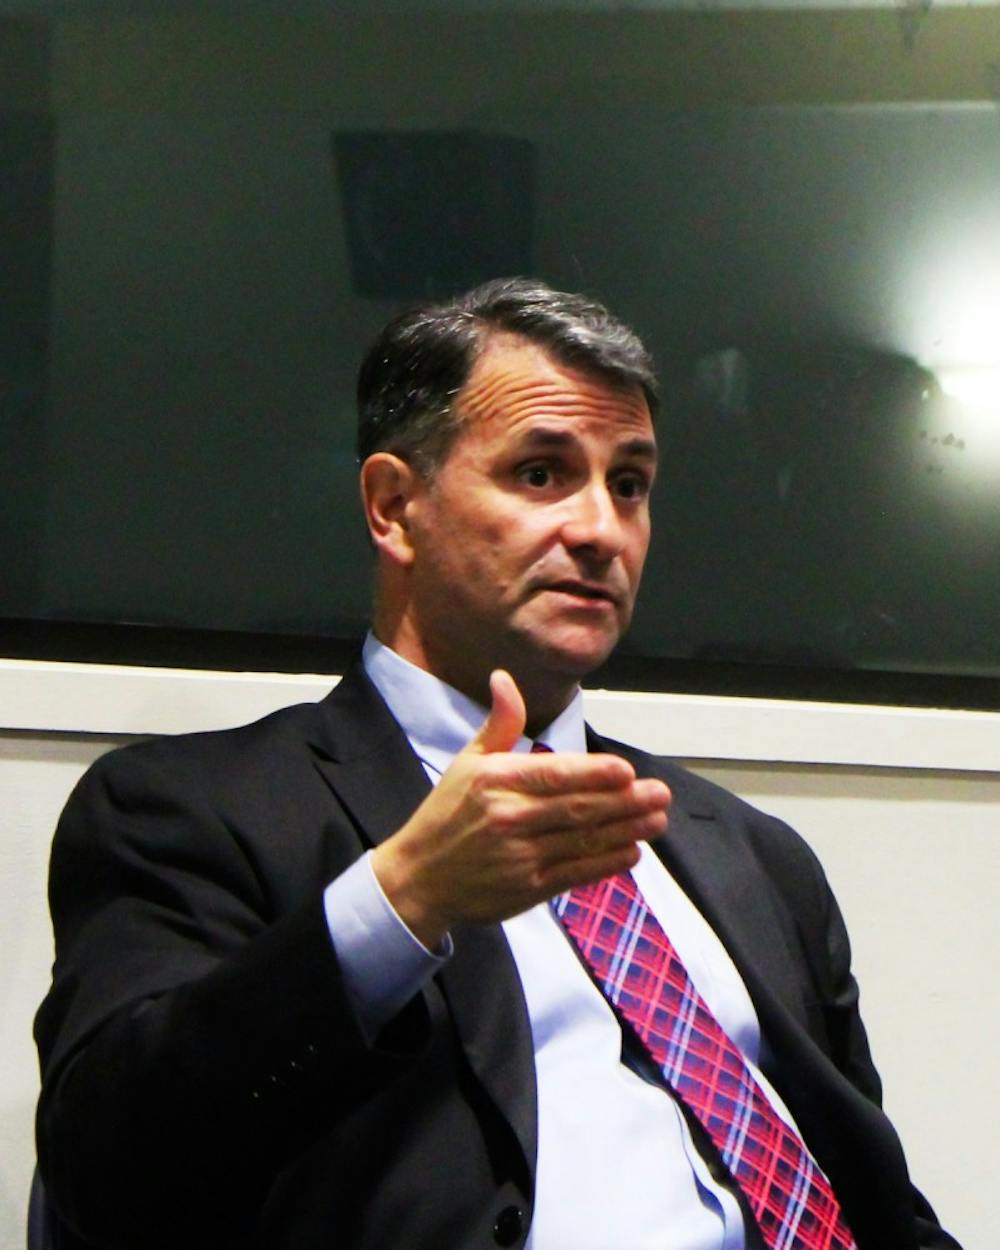 Former Washington lobbyist Jack Abramoff discussed being a lobbyist, his 2006 prison sentencing and his work now to reform the system.